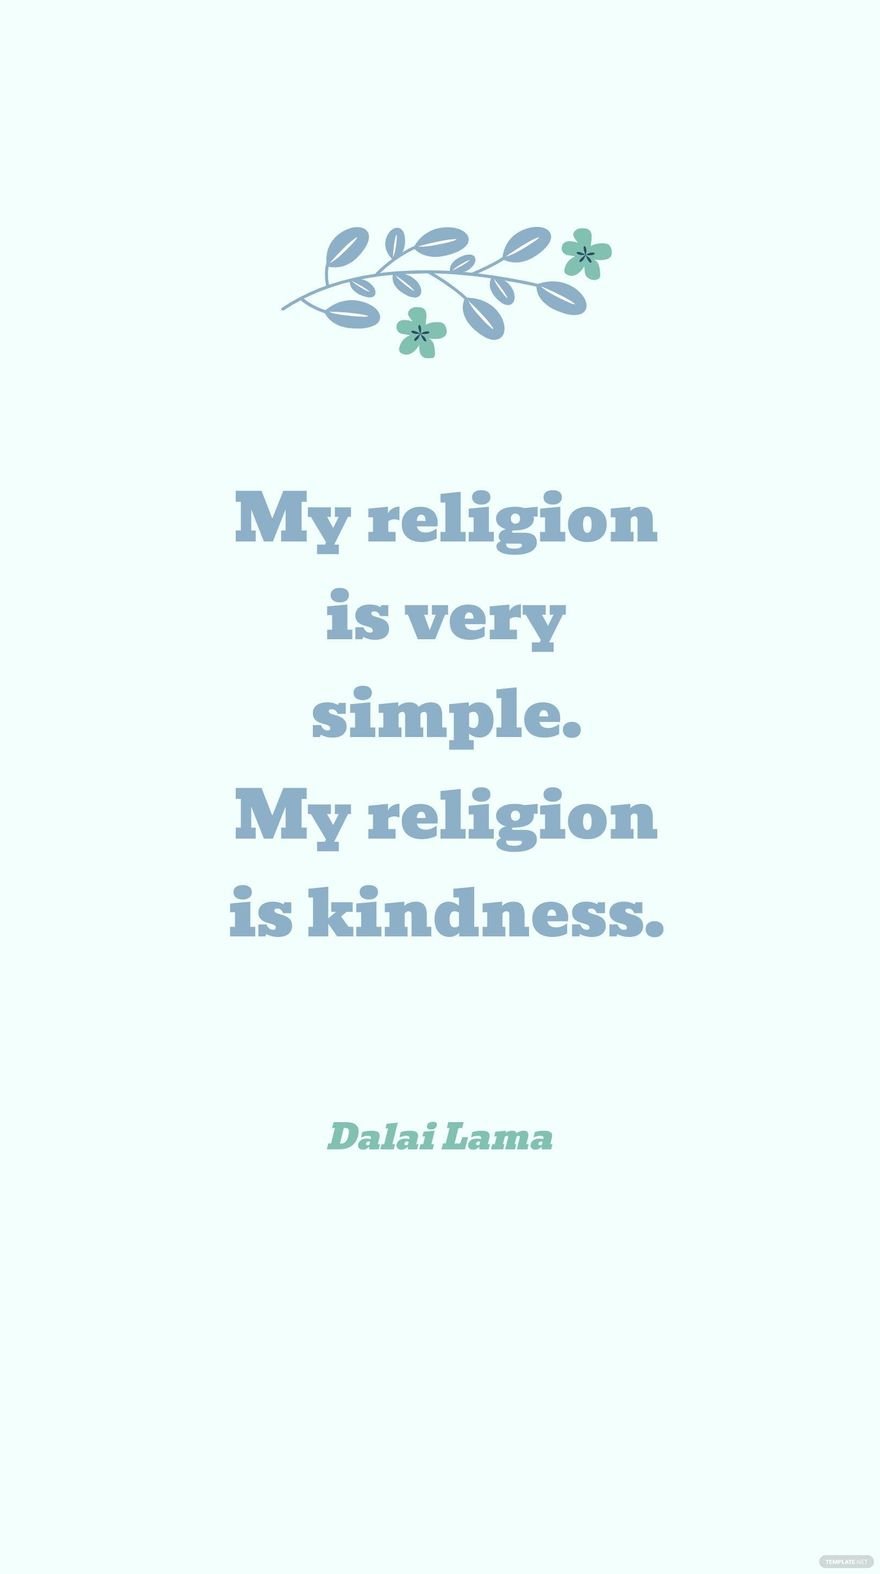 Dalai Lama - My religion is very simple. My religion is kindness. in JPG